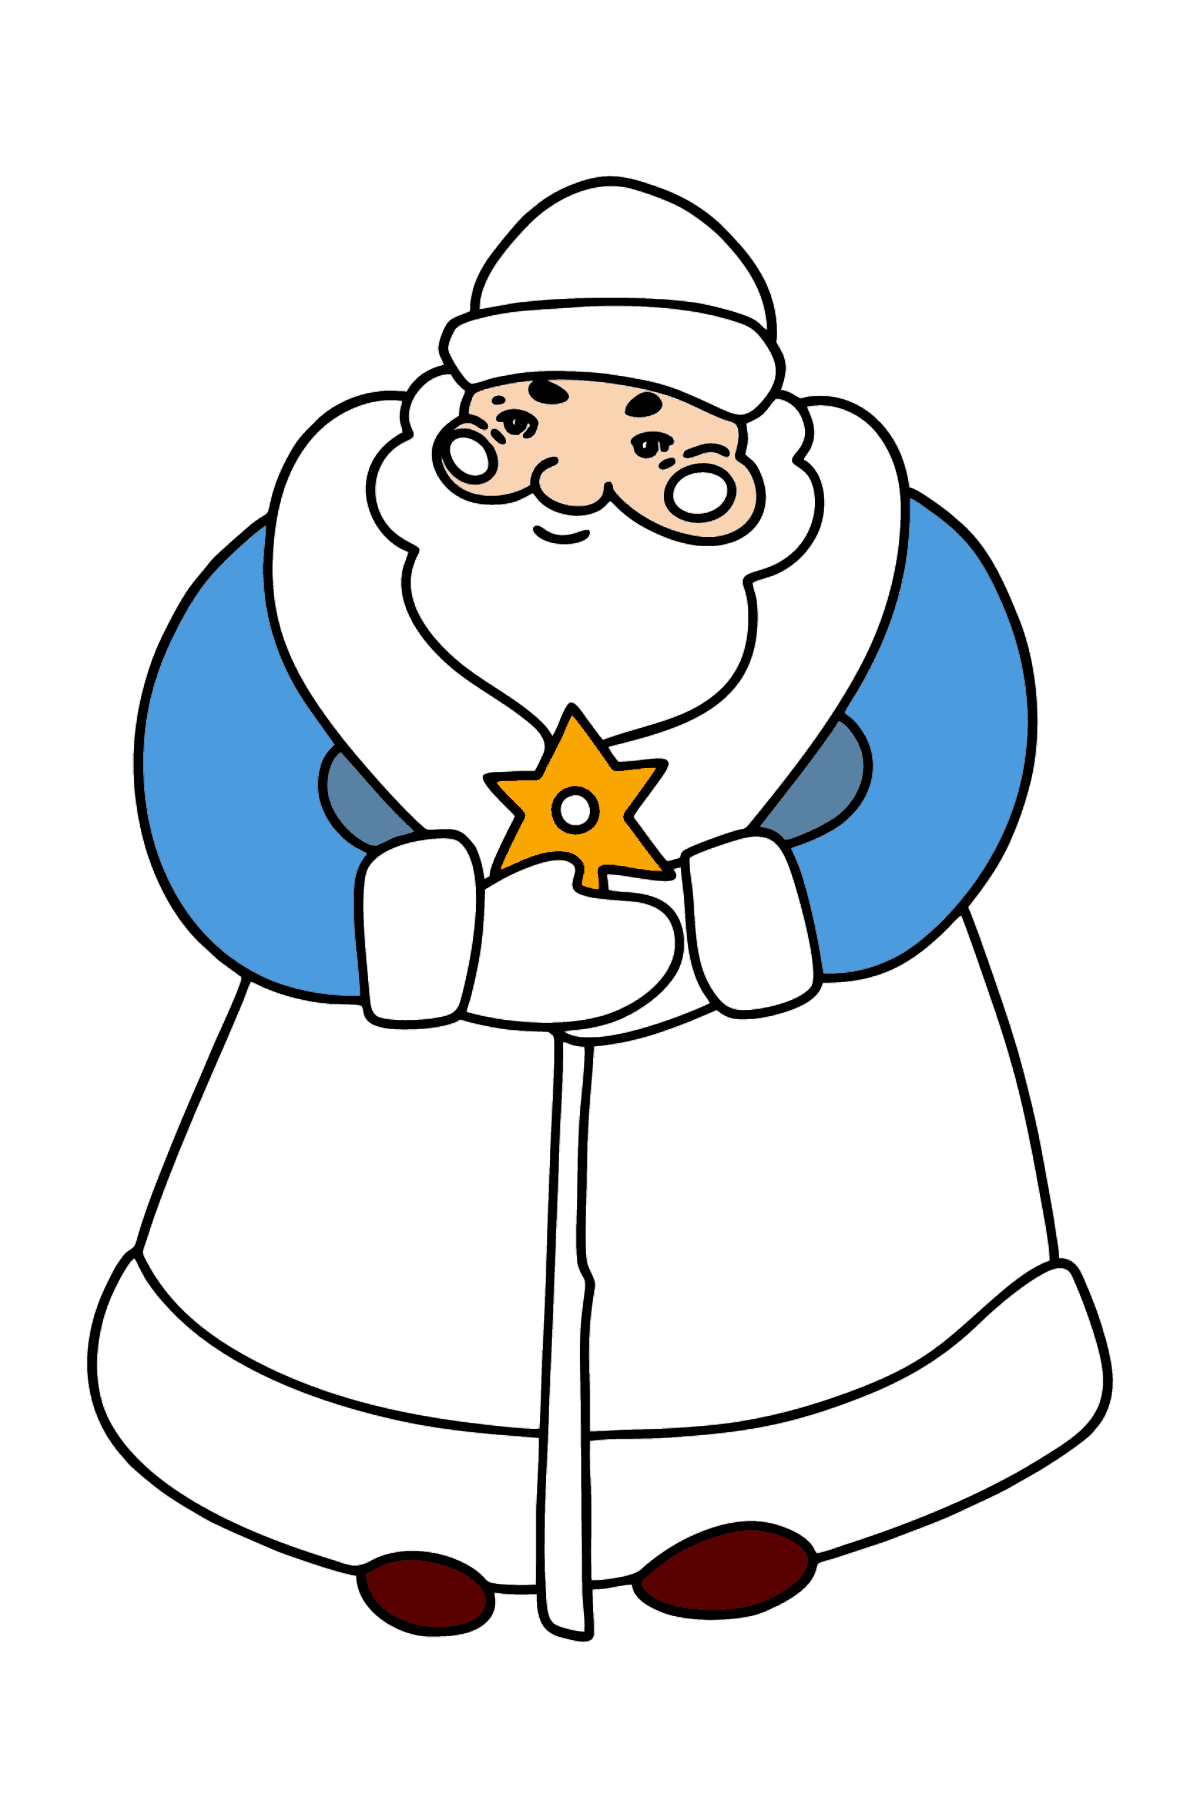 Good Father Frost coloring page - Coloring Pages for Kids